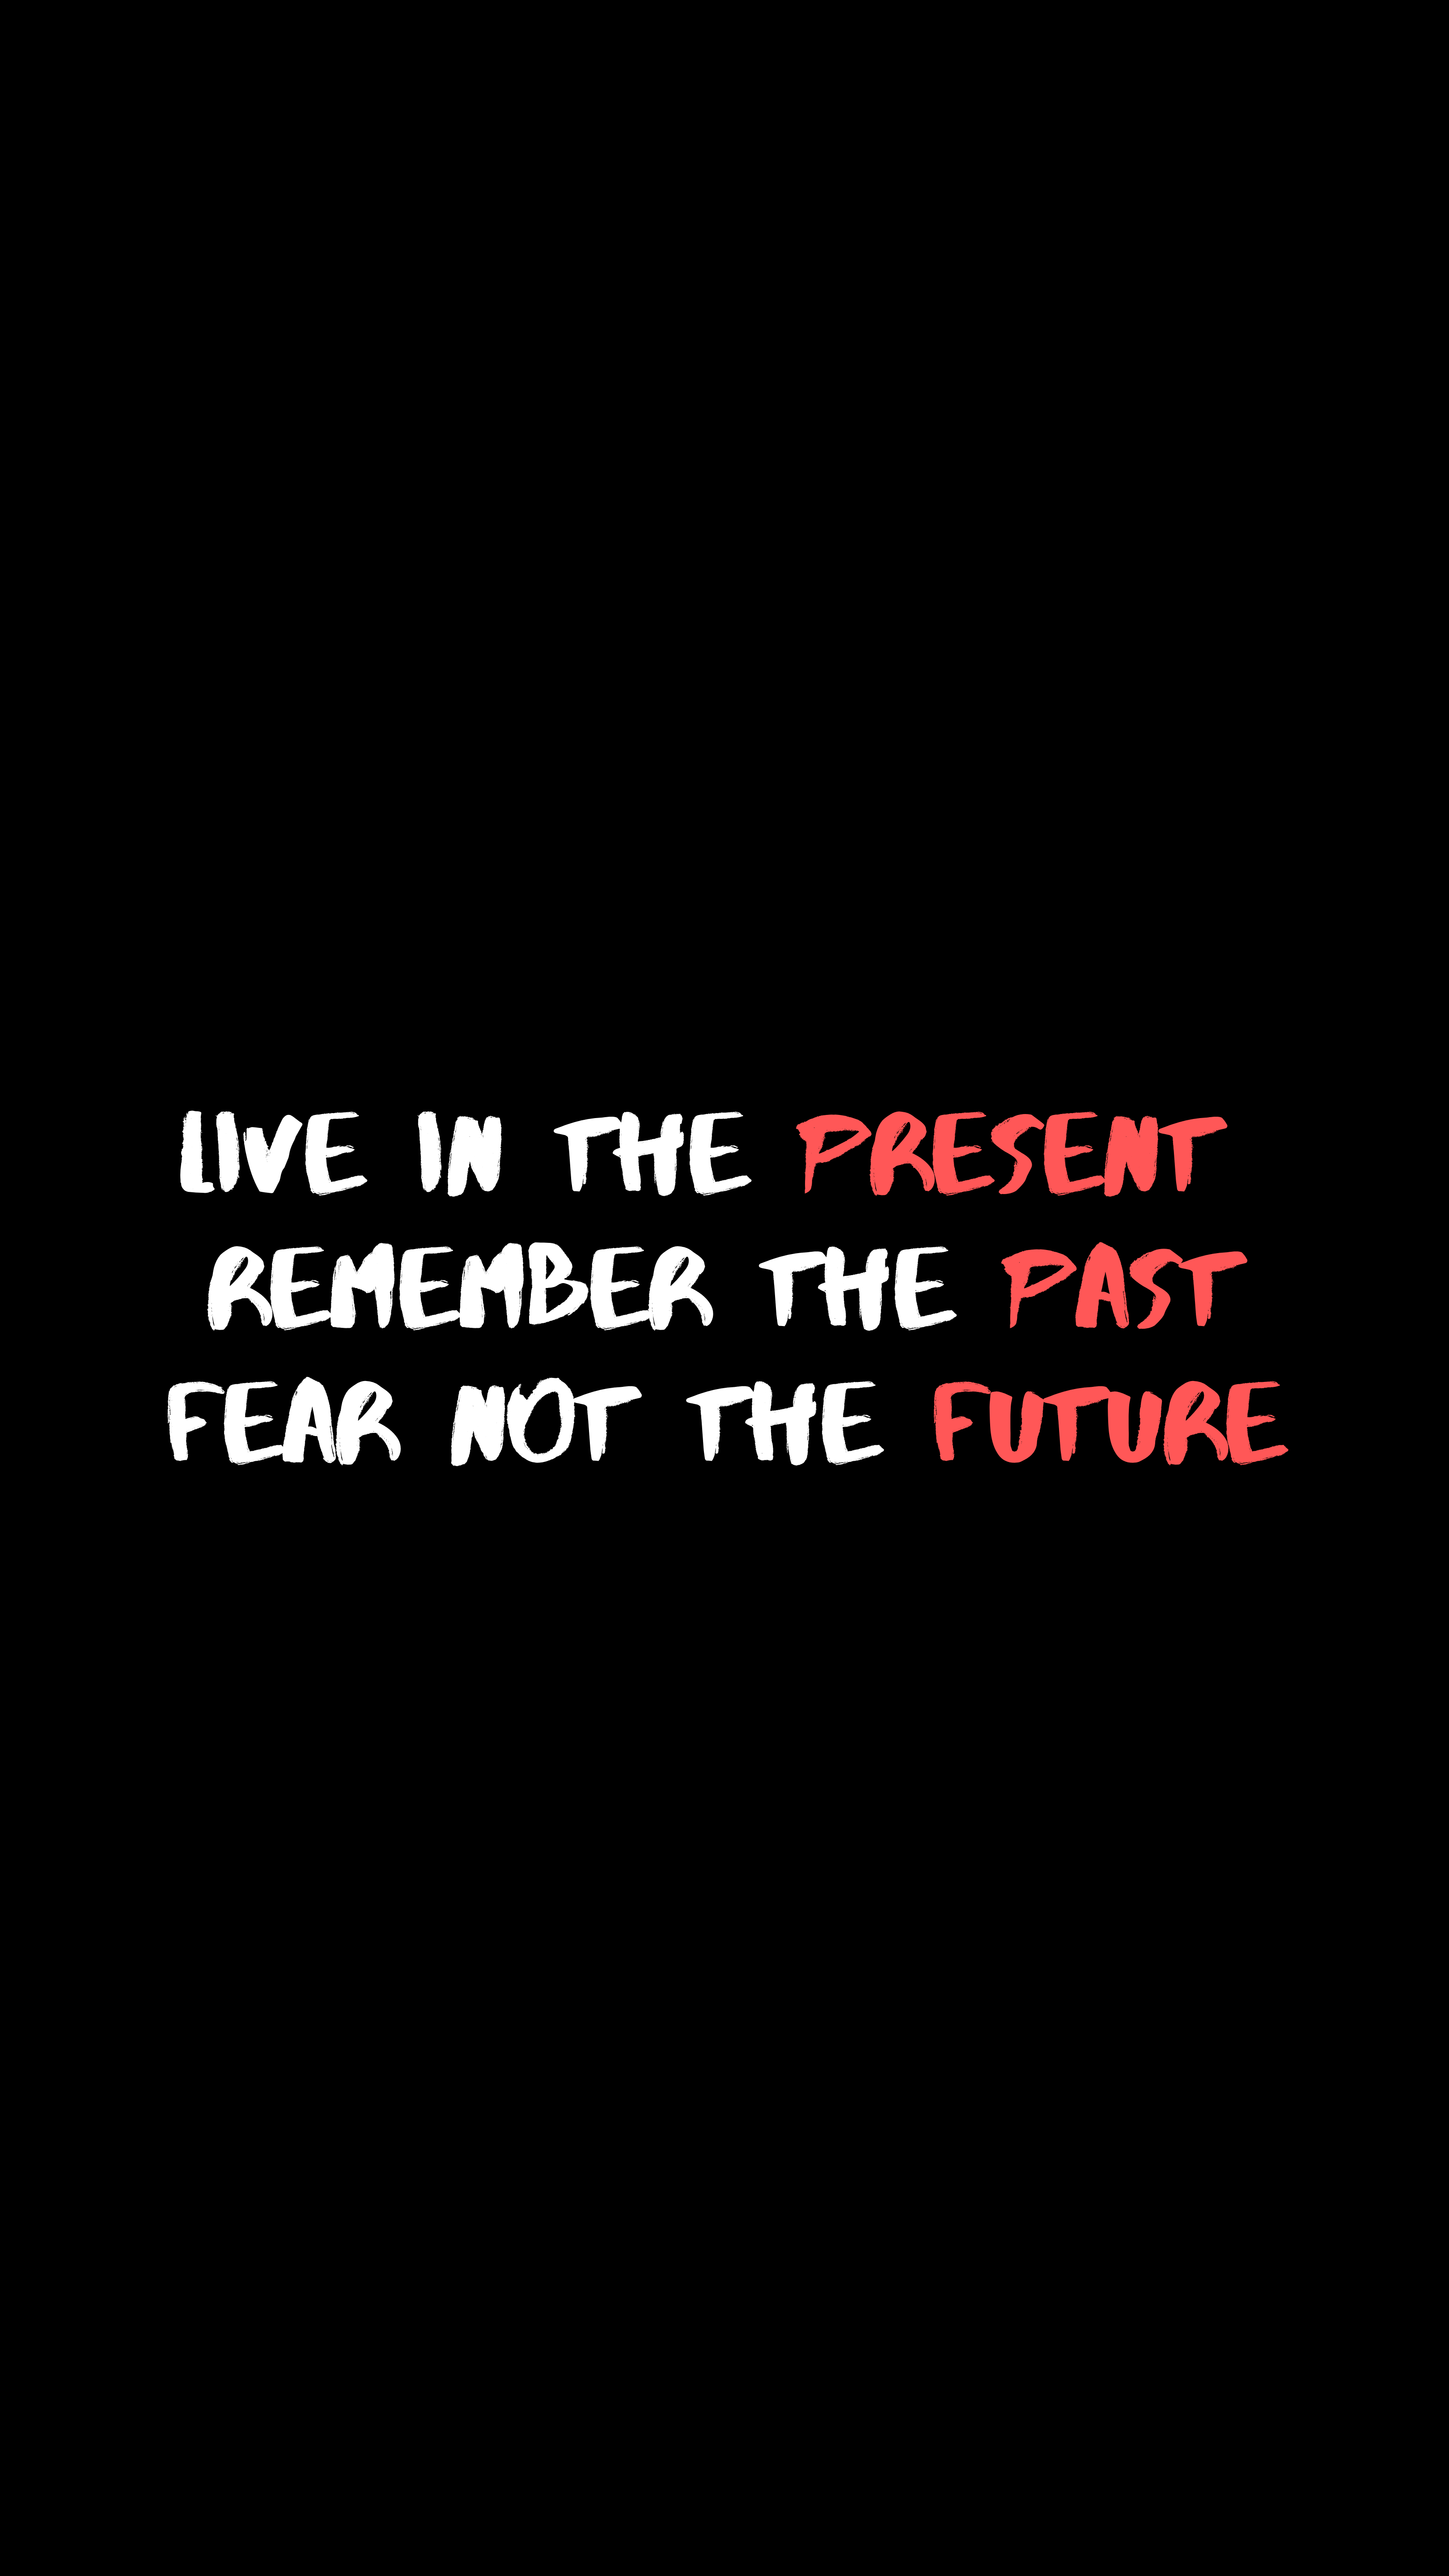 Free HD motivation, words, inspiration, future, quotation, quote, present, past